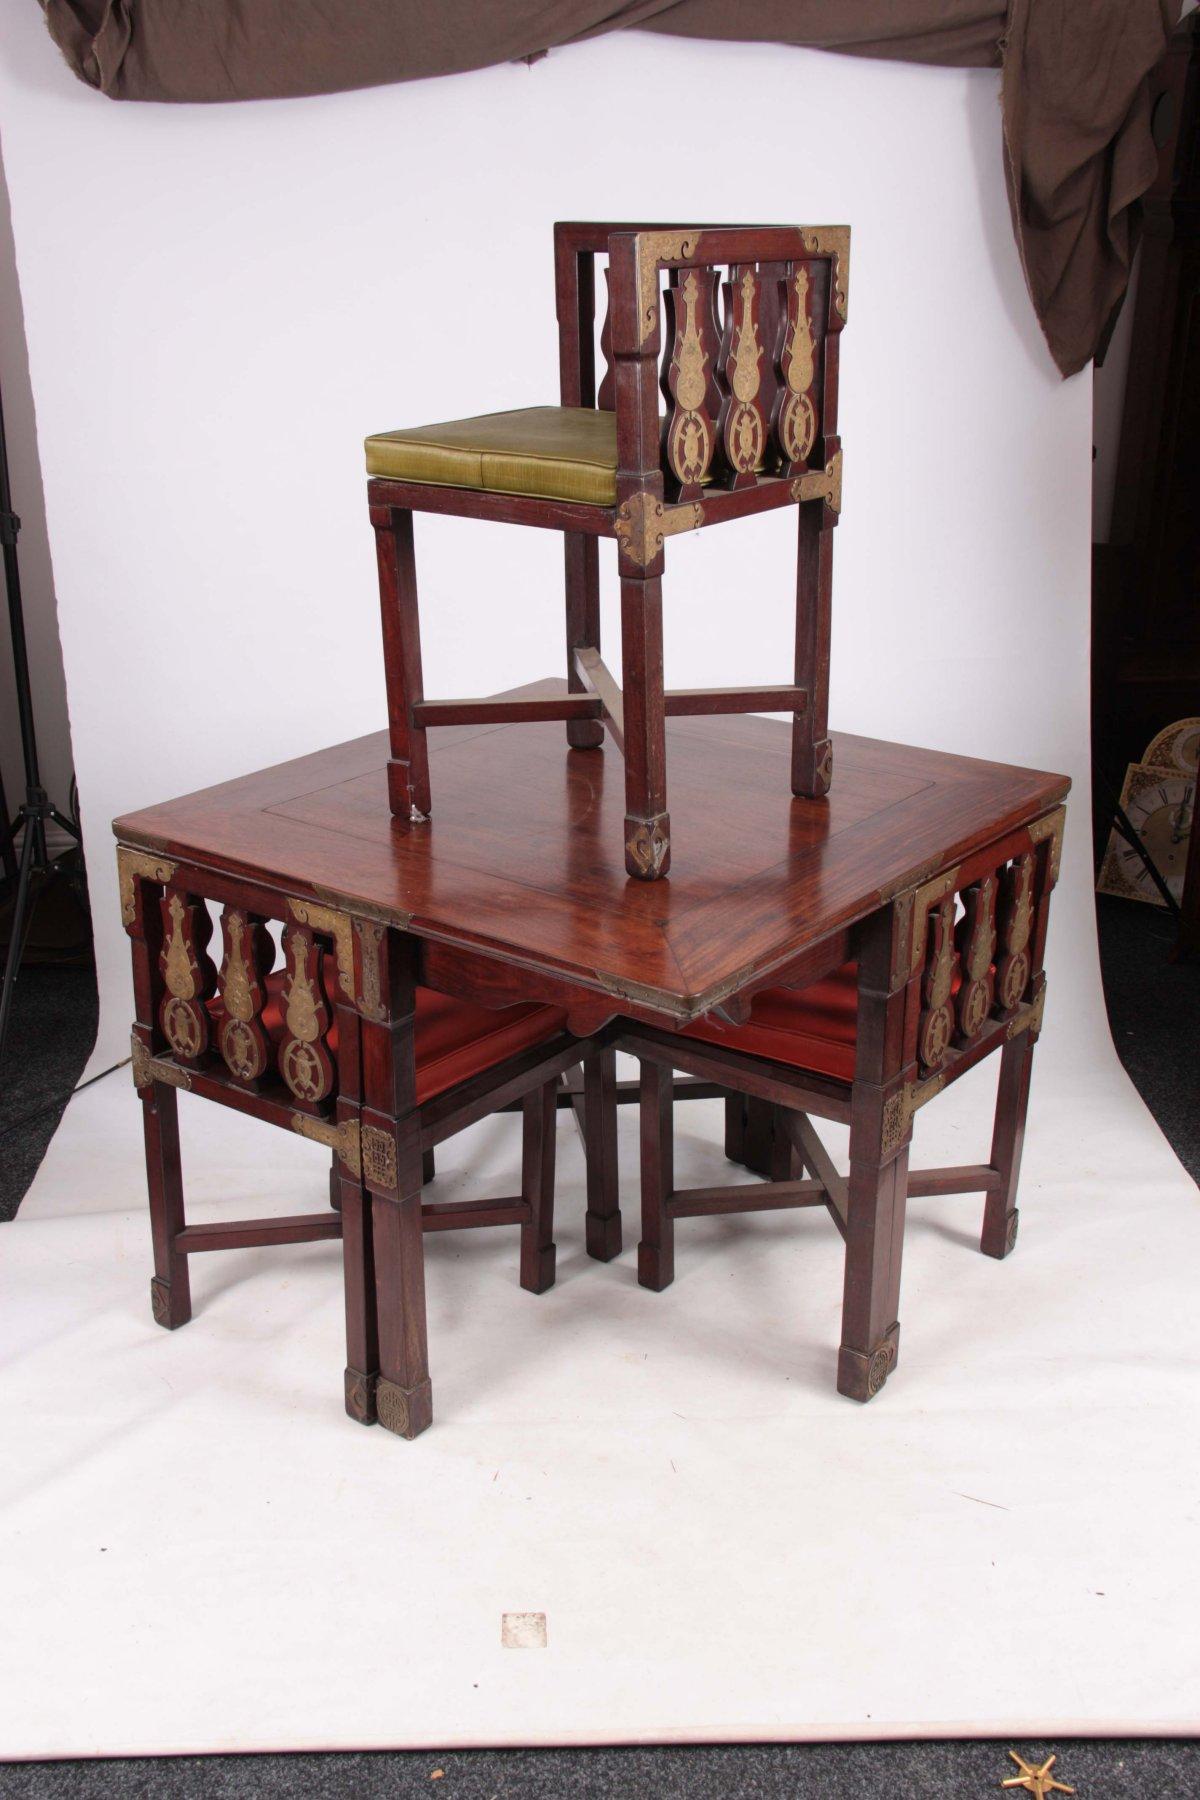 A rare late 19th-century Japanese export square dining table with four matching corner chairs that stow nicely away underneath. The base with four outer legs and a central leg is united by a high spaped cross stretcher. The four corner chairs with